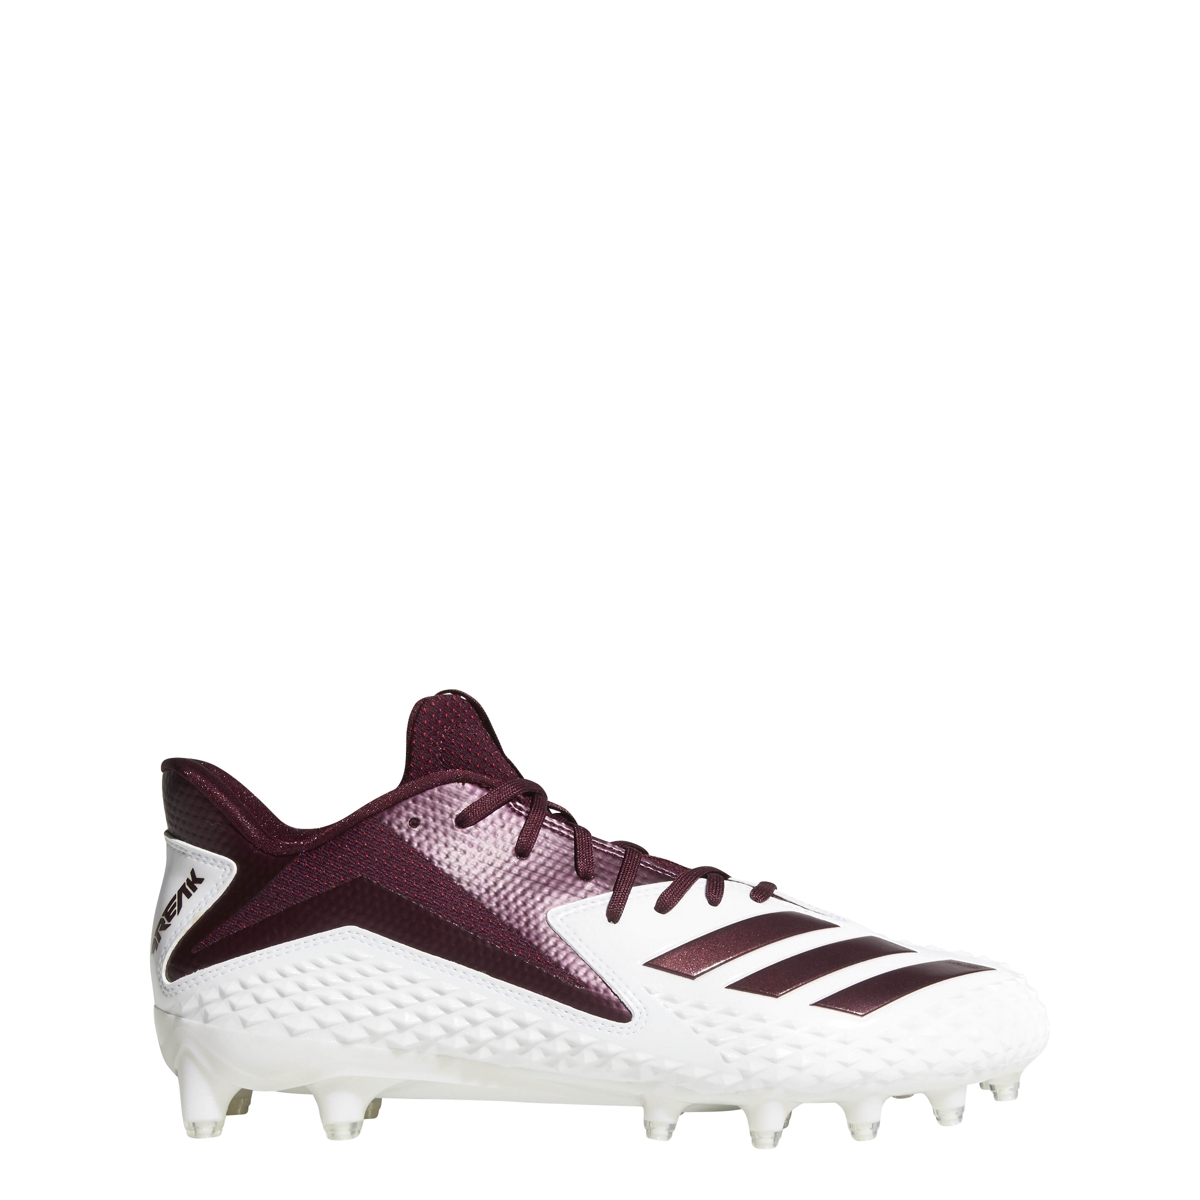 maroon and white adidas football cleats